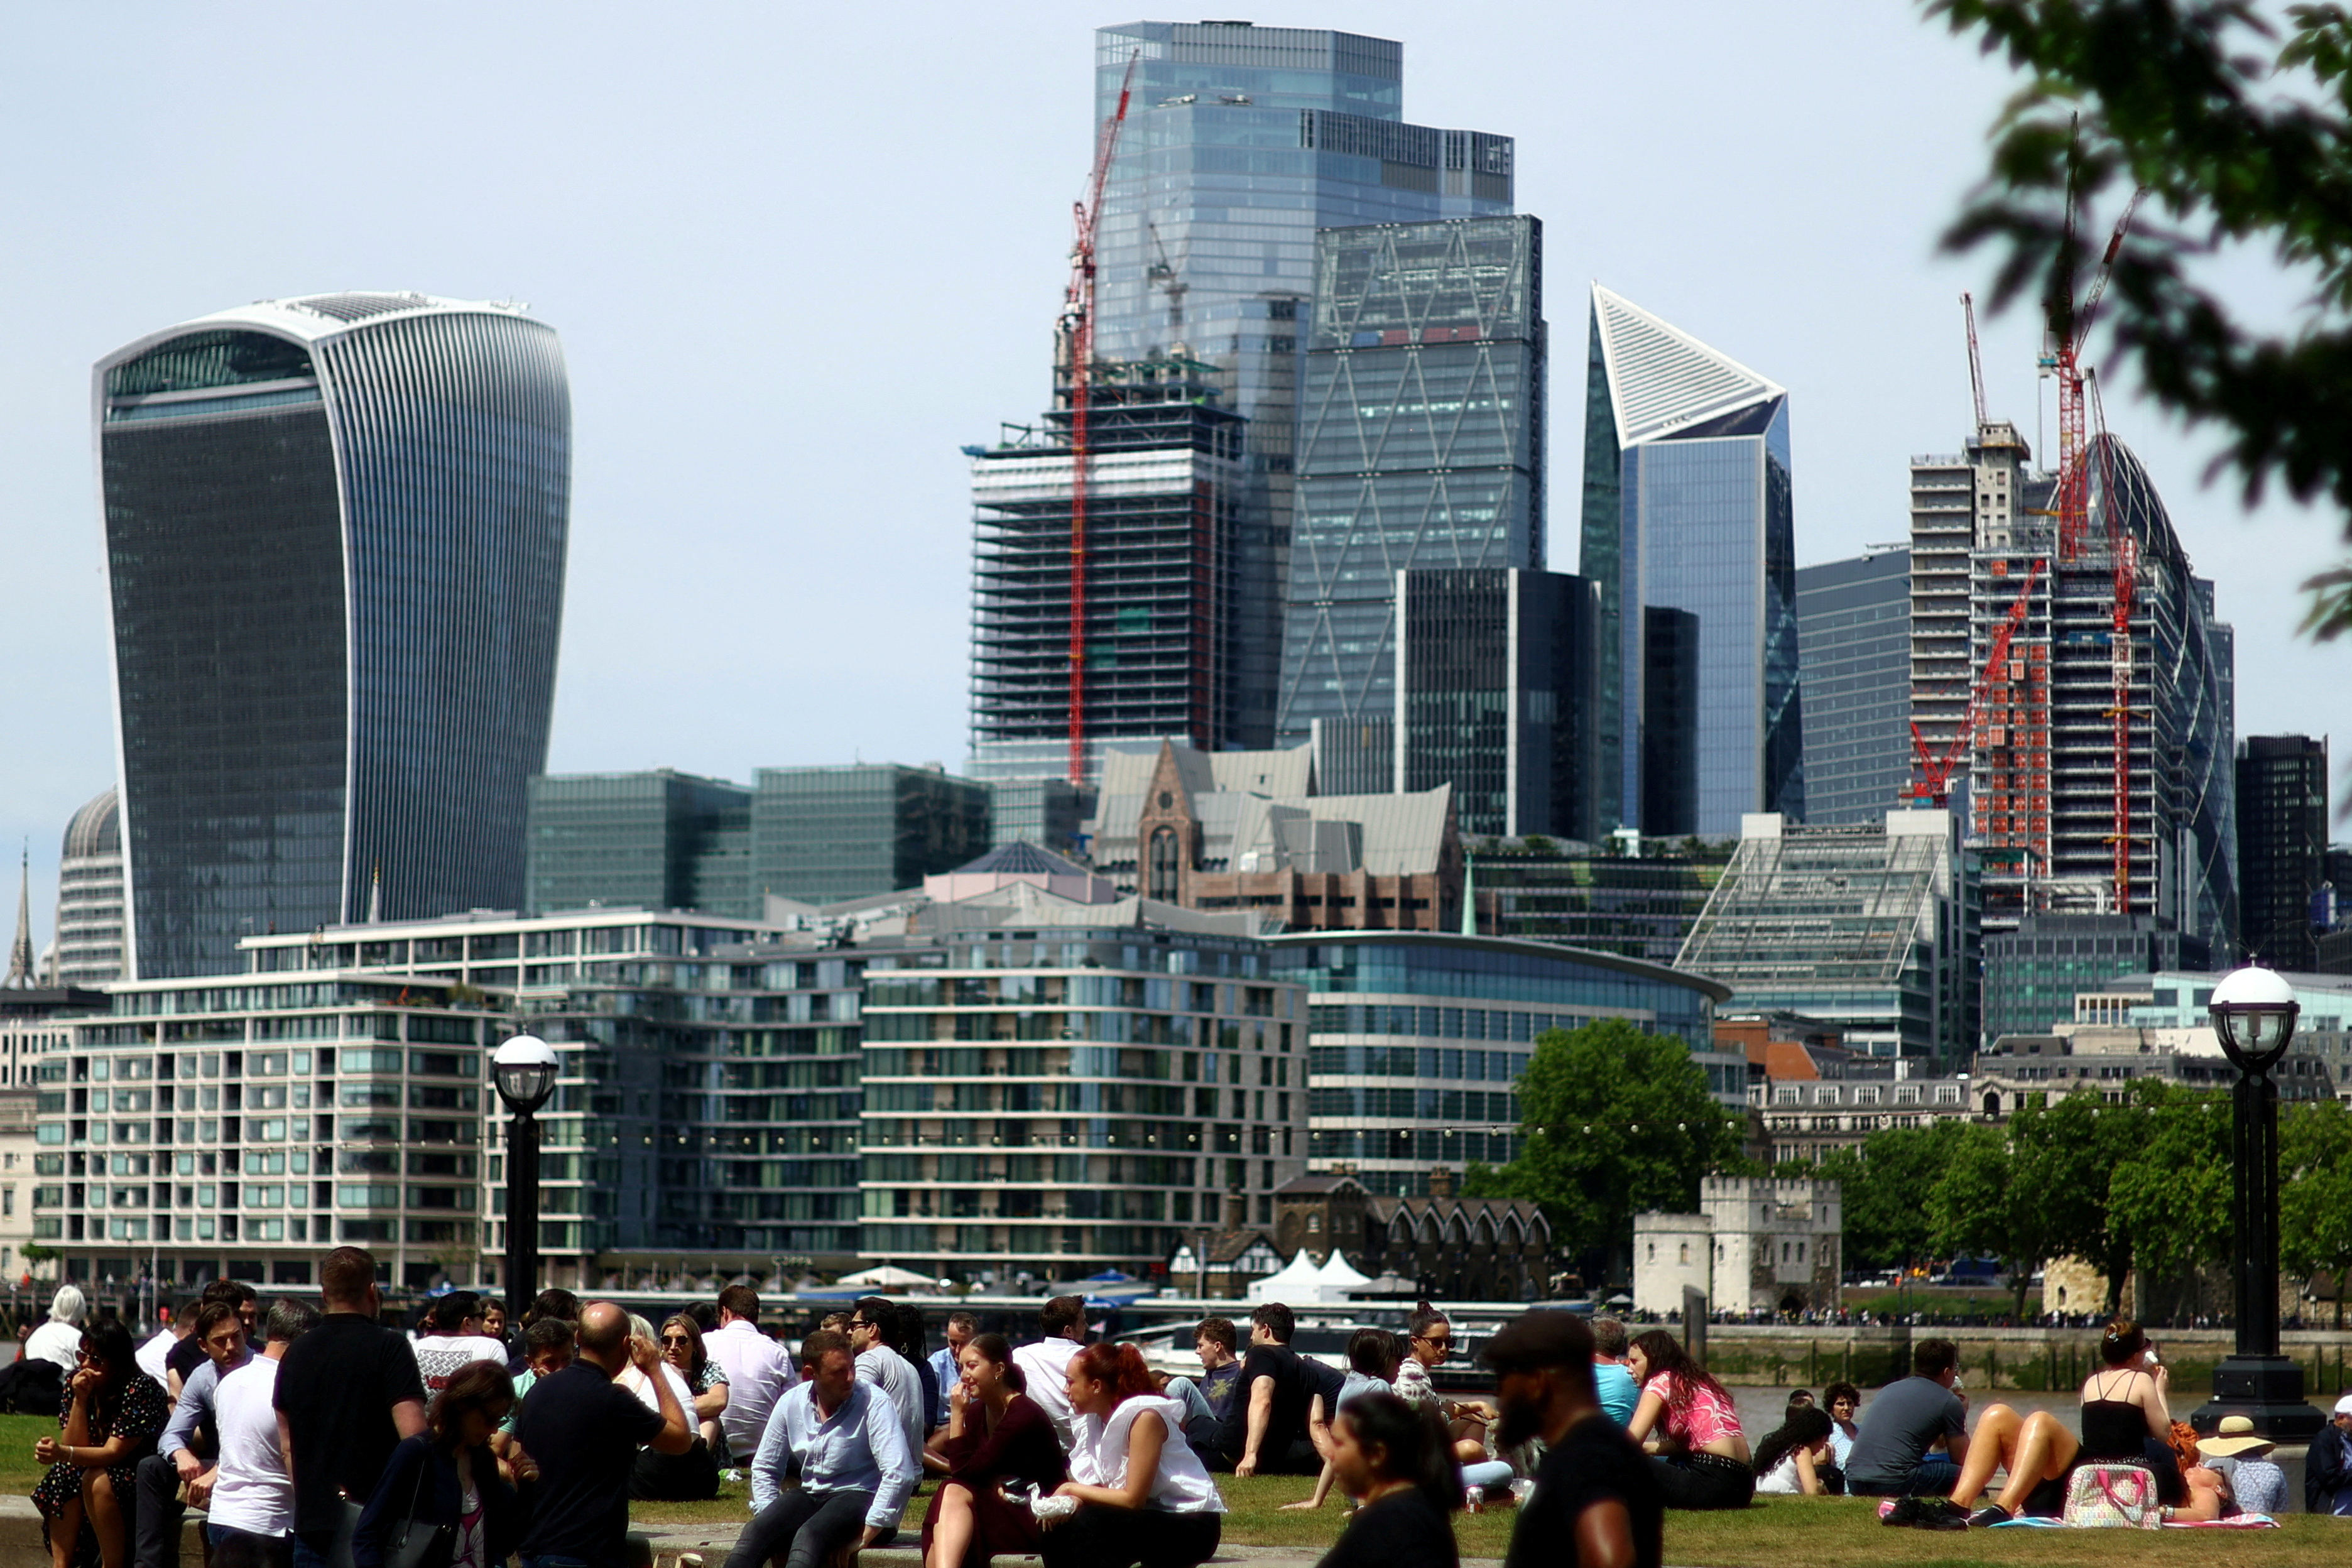 People enjoy warm weather in front of the city of London financial district in London